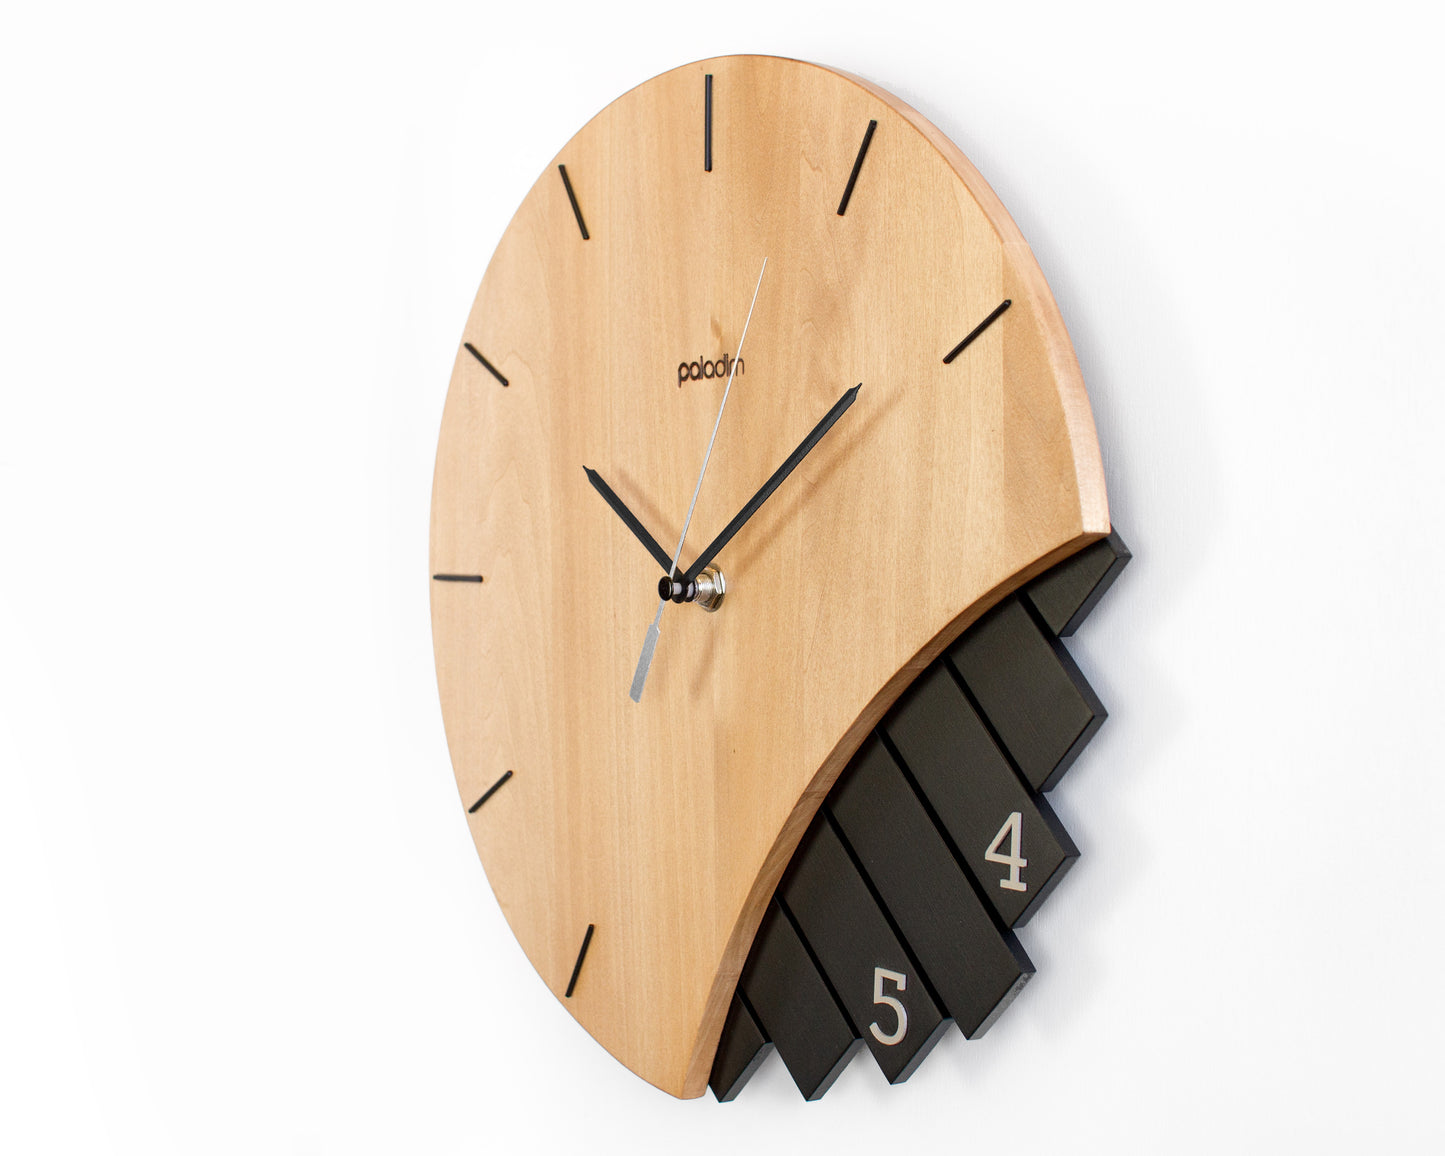 CHAST 2 component wall clock